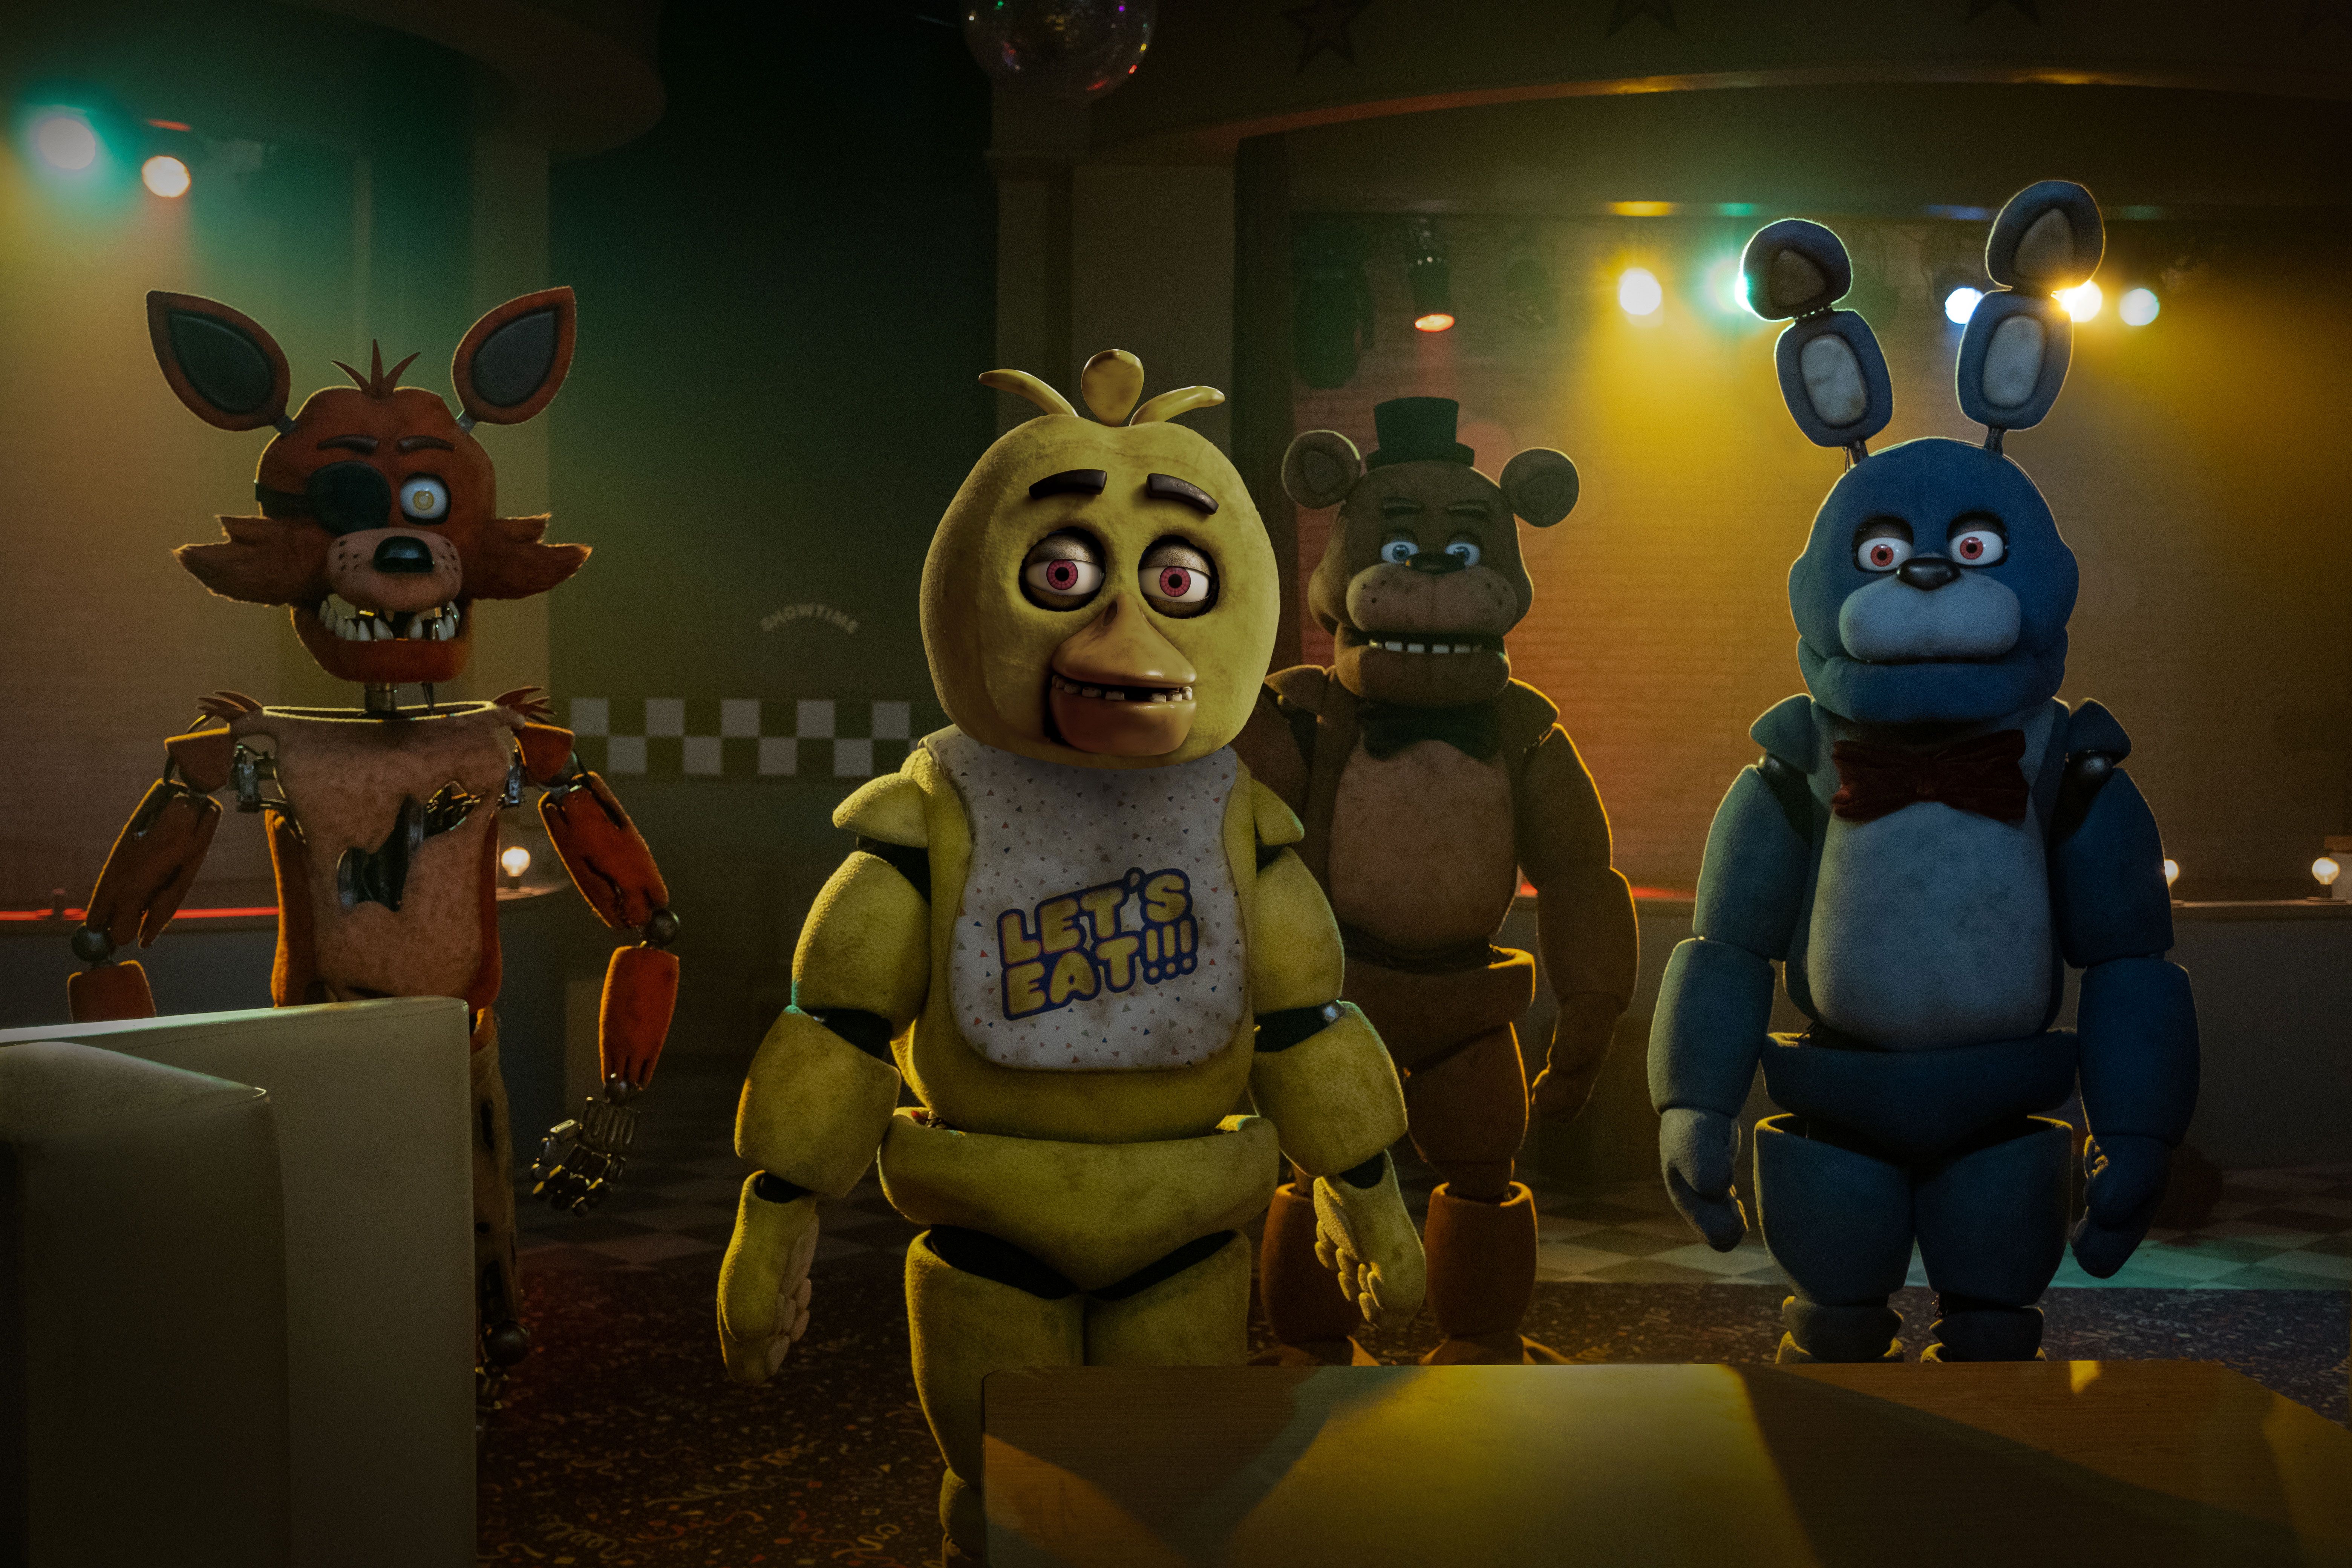 A COMPLETE ANALYSIS OF FIVE NIGHTS AT FREDDY'S 2 